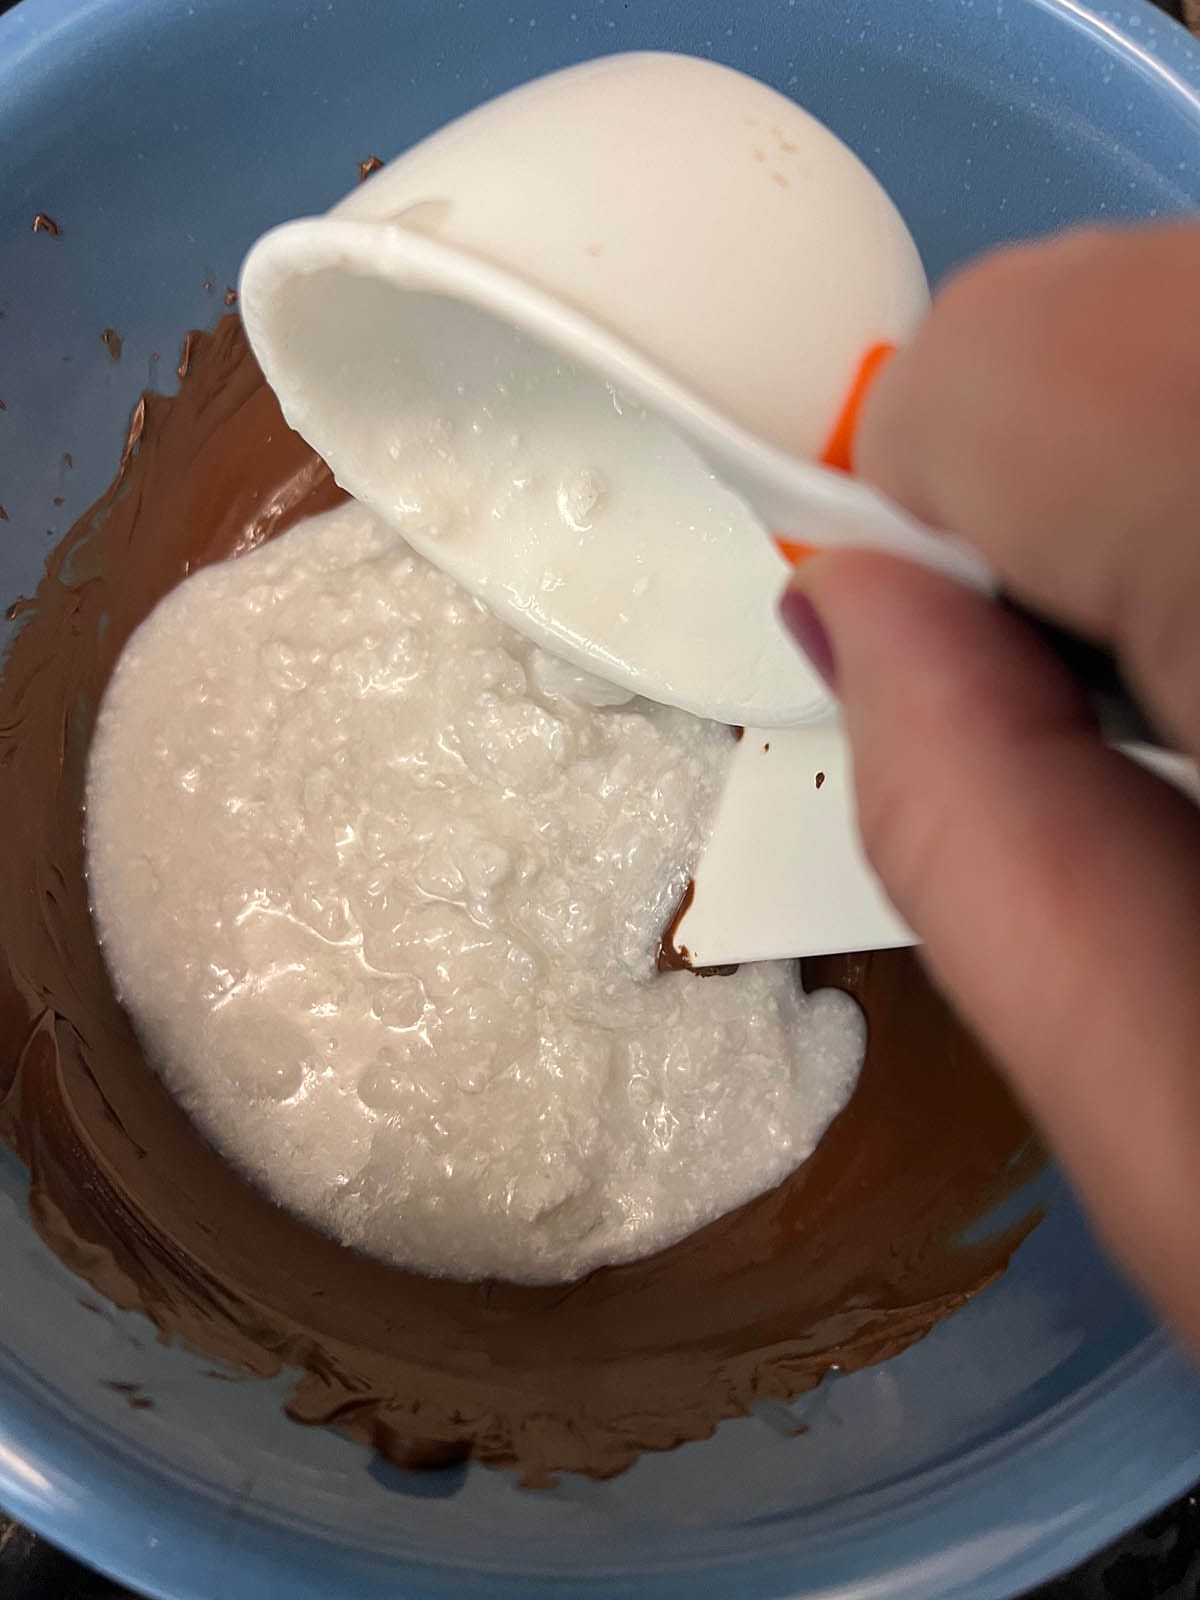 Coconut milk being added to the melted chocolate.